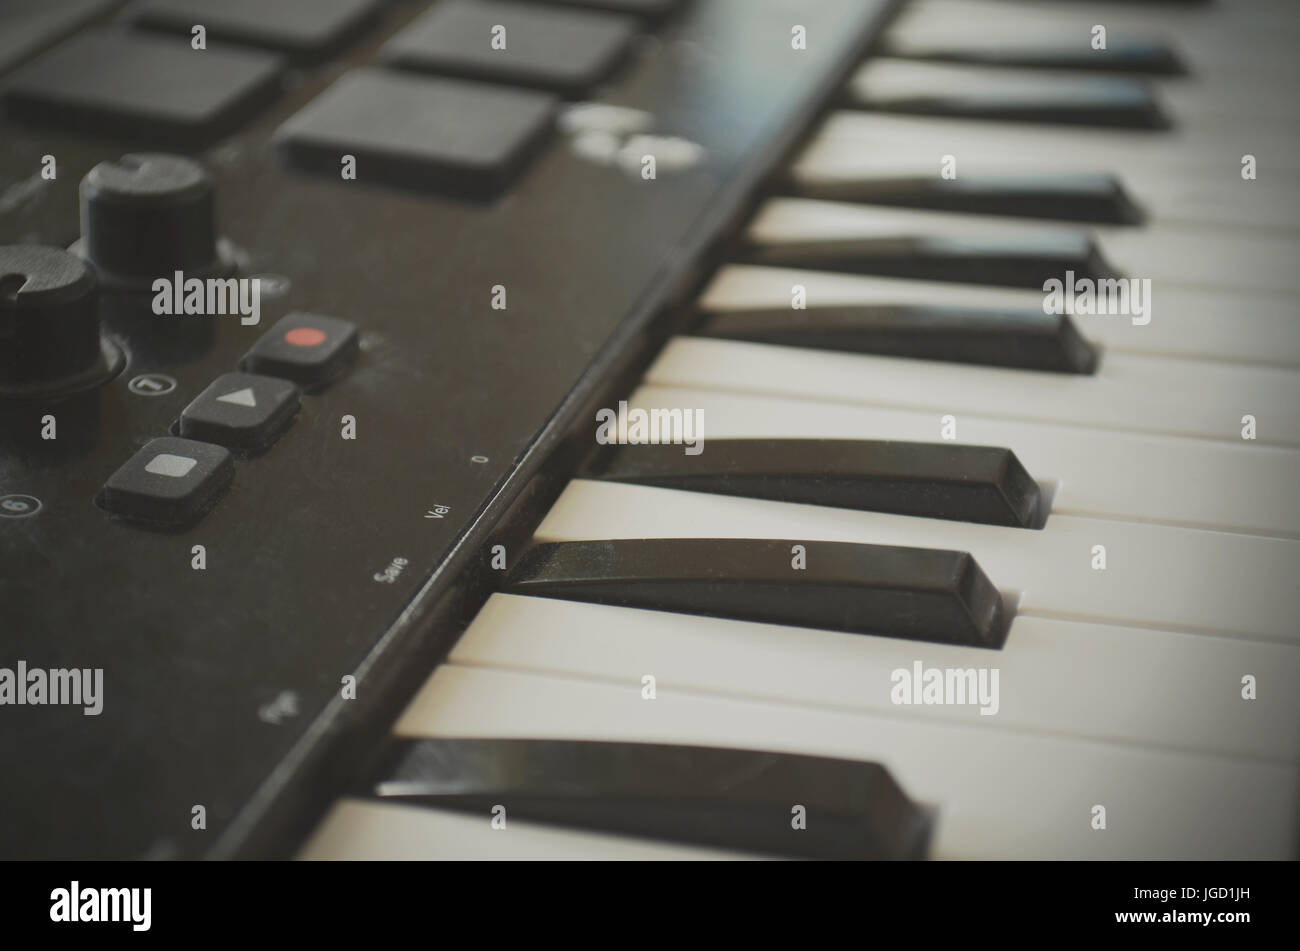 Piano or electone midi keyboard, electronic musical synthesizer white and black key. Vintage effect, instagram filter style. Stock Photo